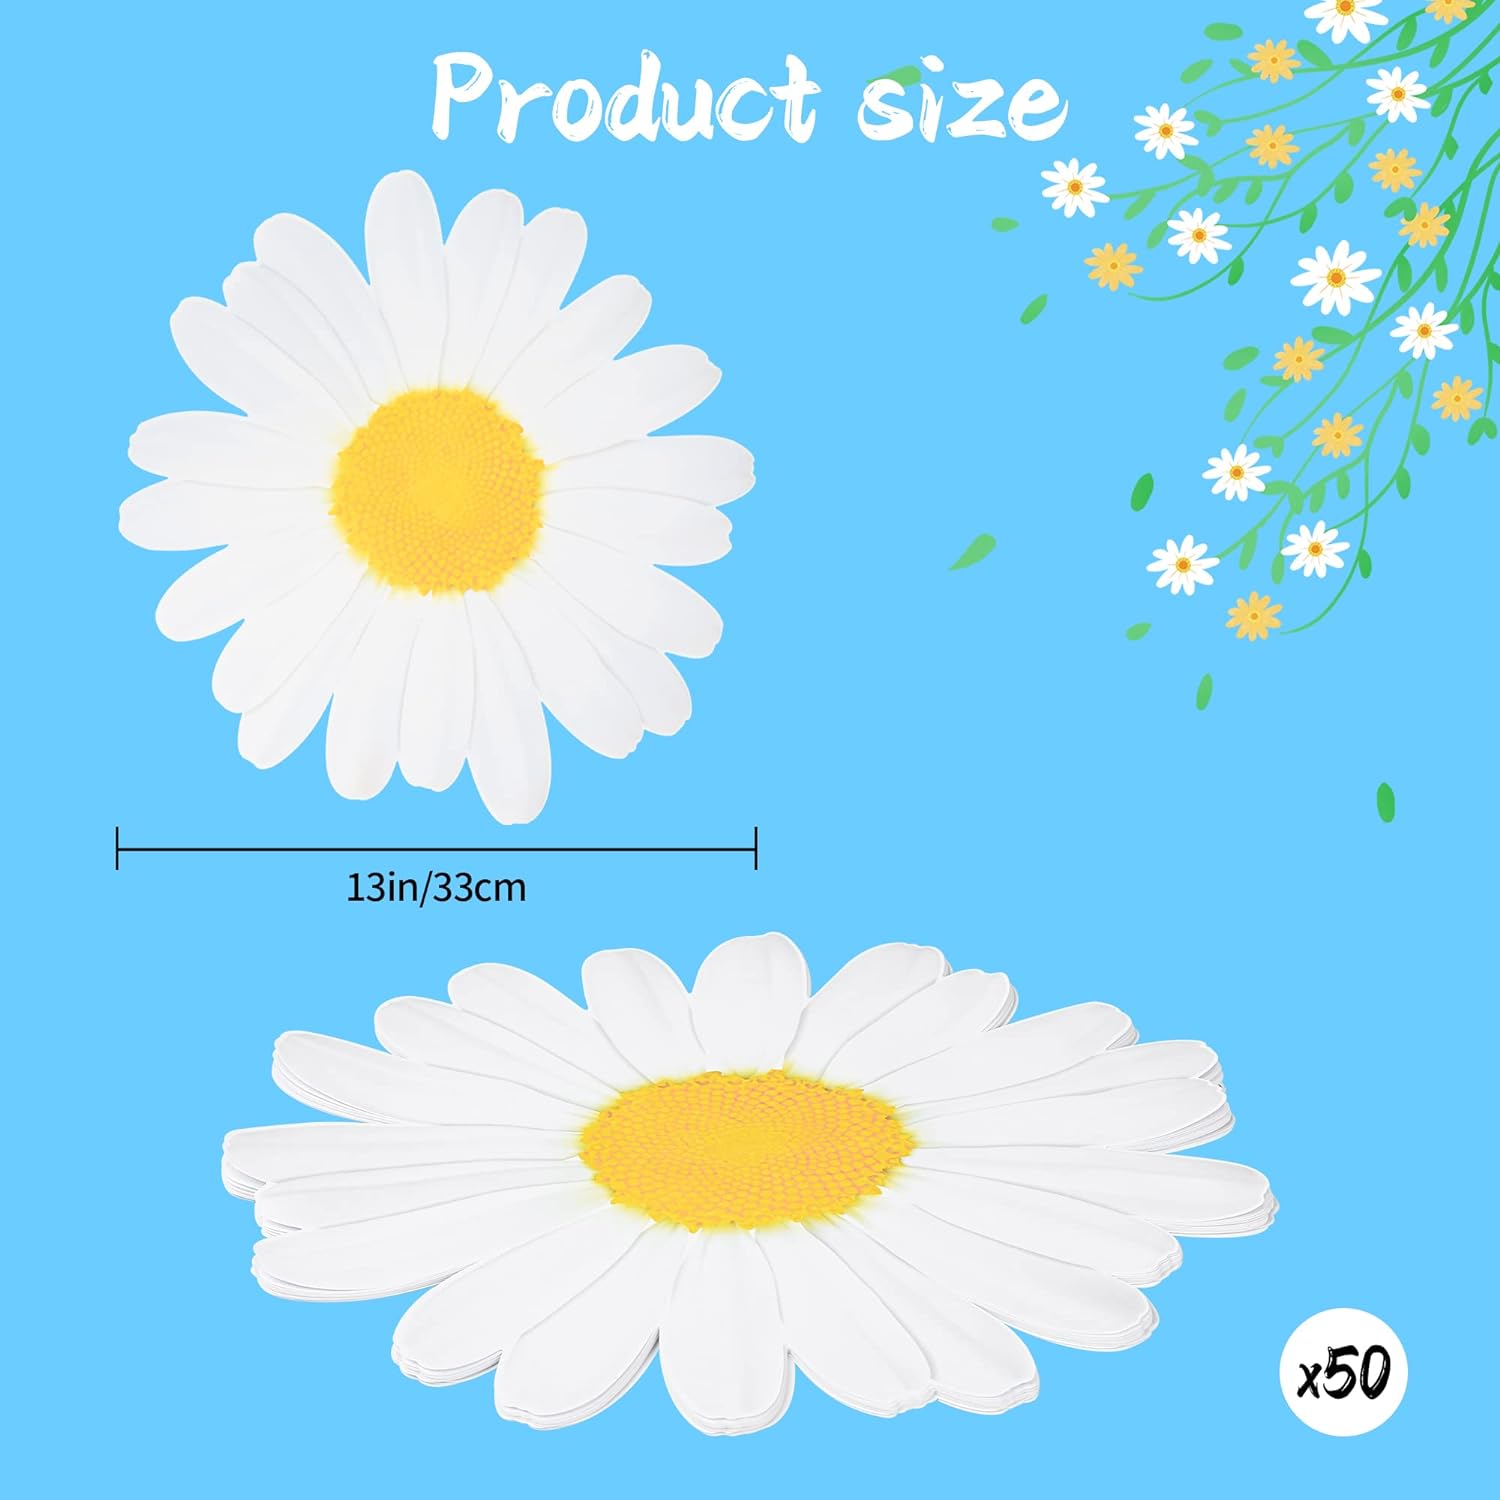 Bulk 50 Pcs Disposable Sunflower Shaped Paper Placemats Floral Chargers for Wedding Bridal Baby Shower Spring Summer Parties Wholesale